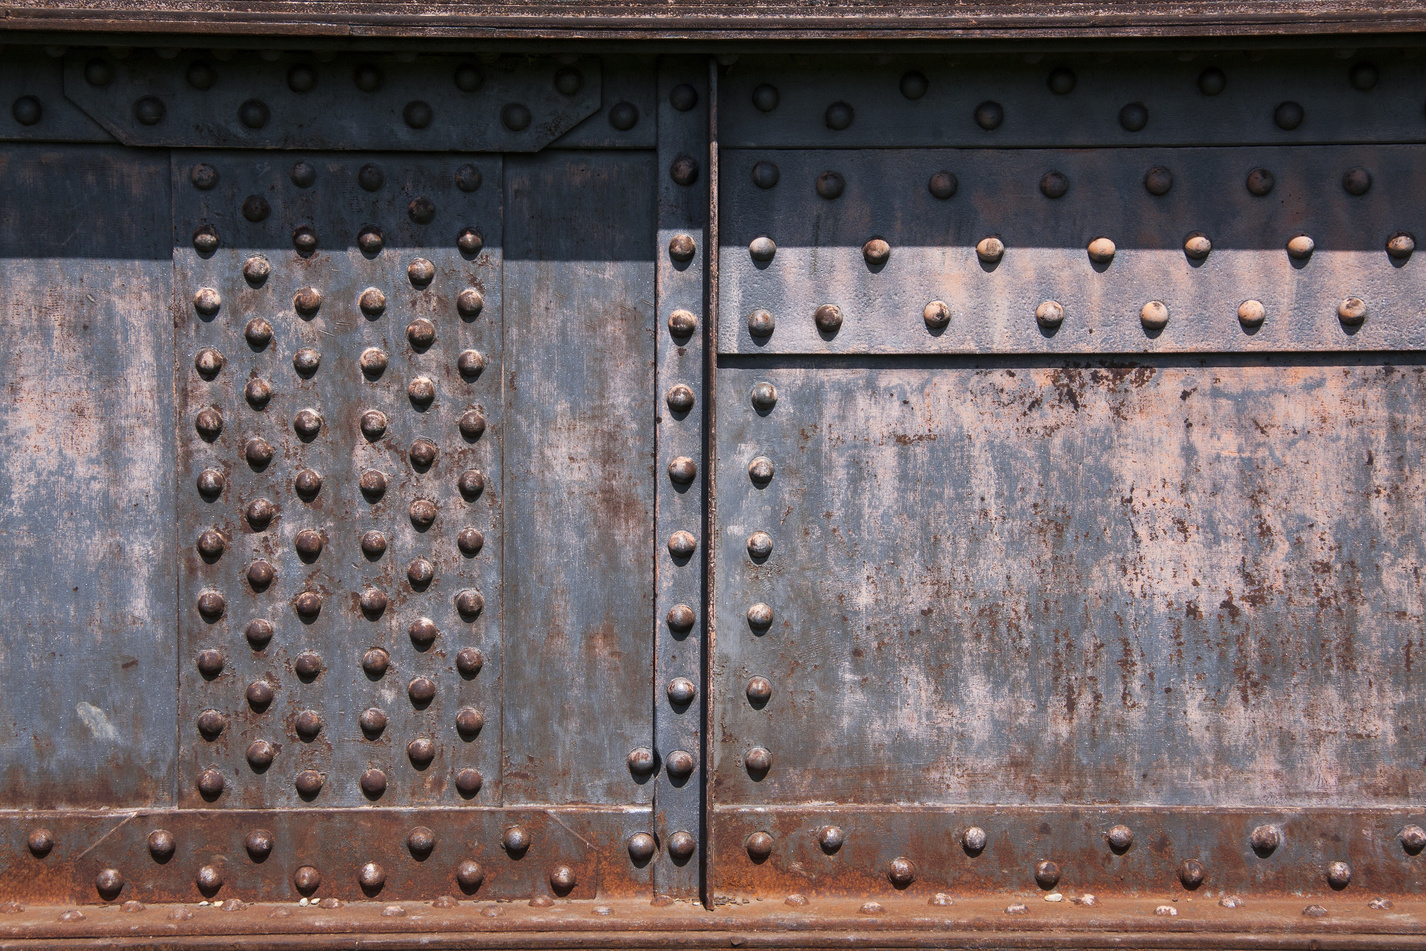 Rusted Metal Surface